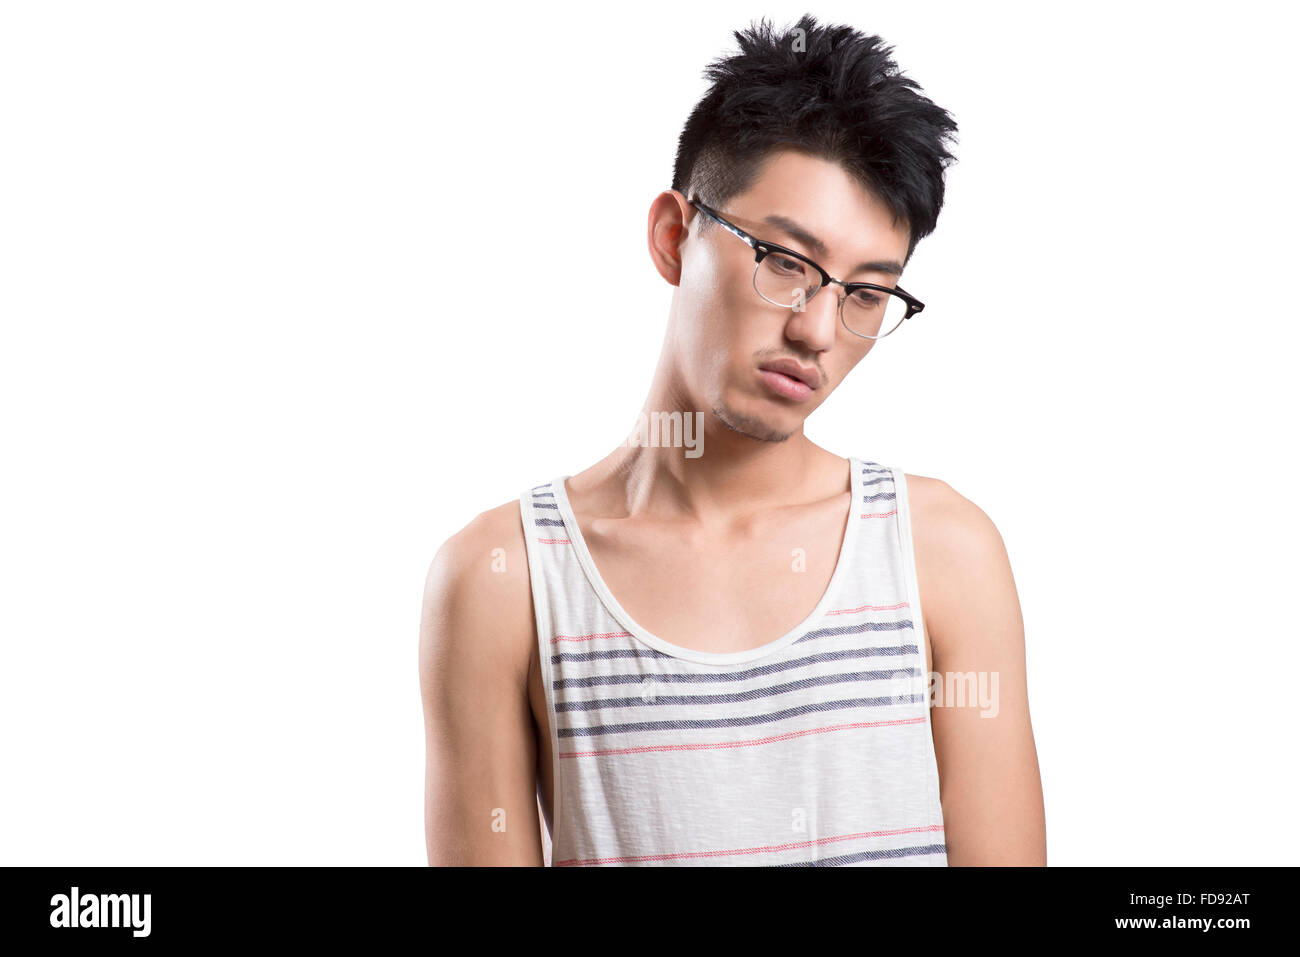 Portrait of young man depressed Stock Photo